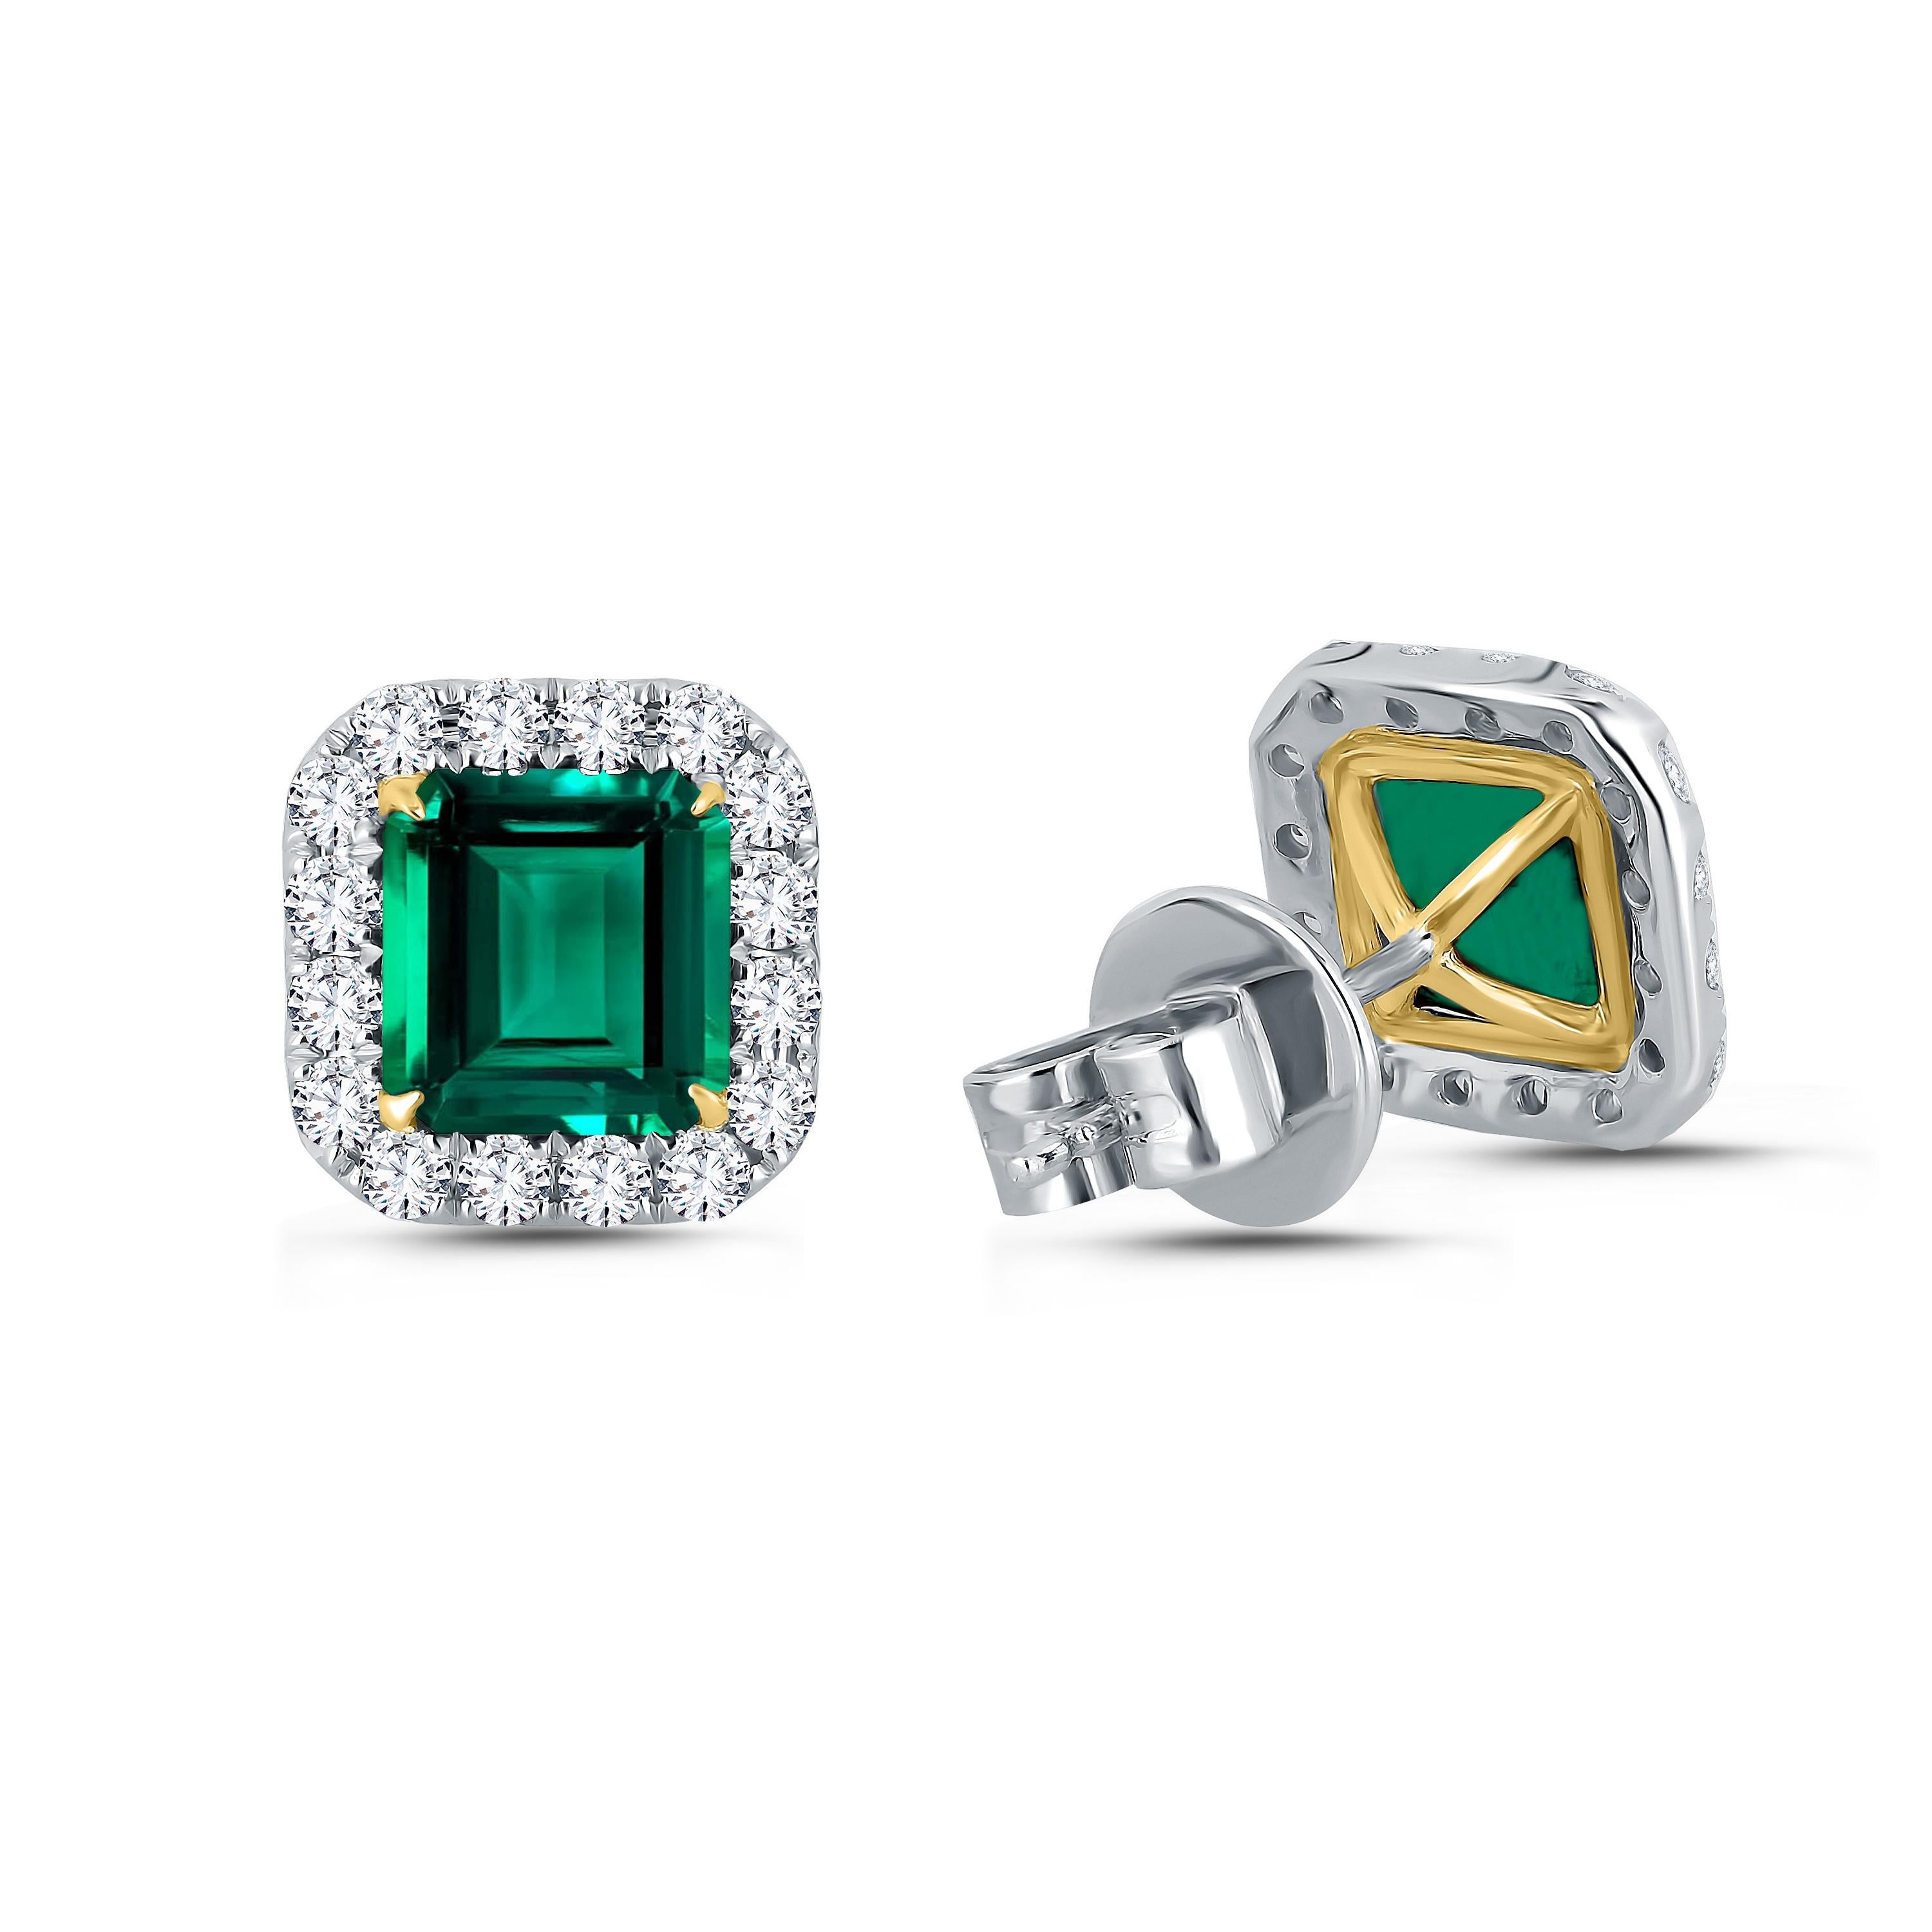 Meet our exquisite cushion cut emerald earrings. These stunning pieces showcase the timeless allure of 2.02 carats of captivating emeralds, their vivid green hues accentuated by a sparkling halo of round white diamonds. Crafted with meticulous